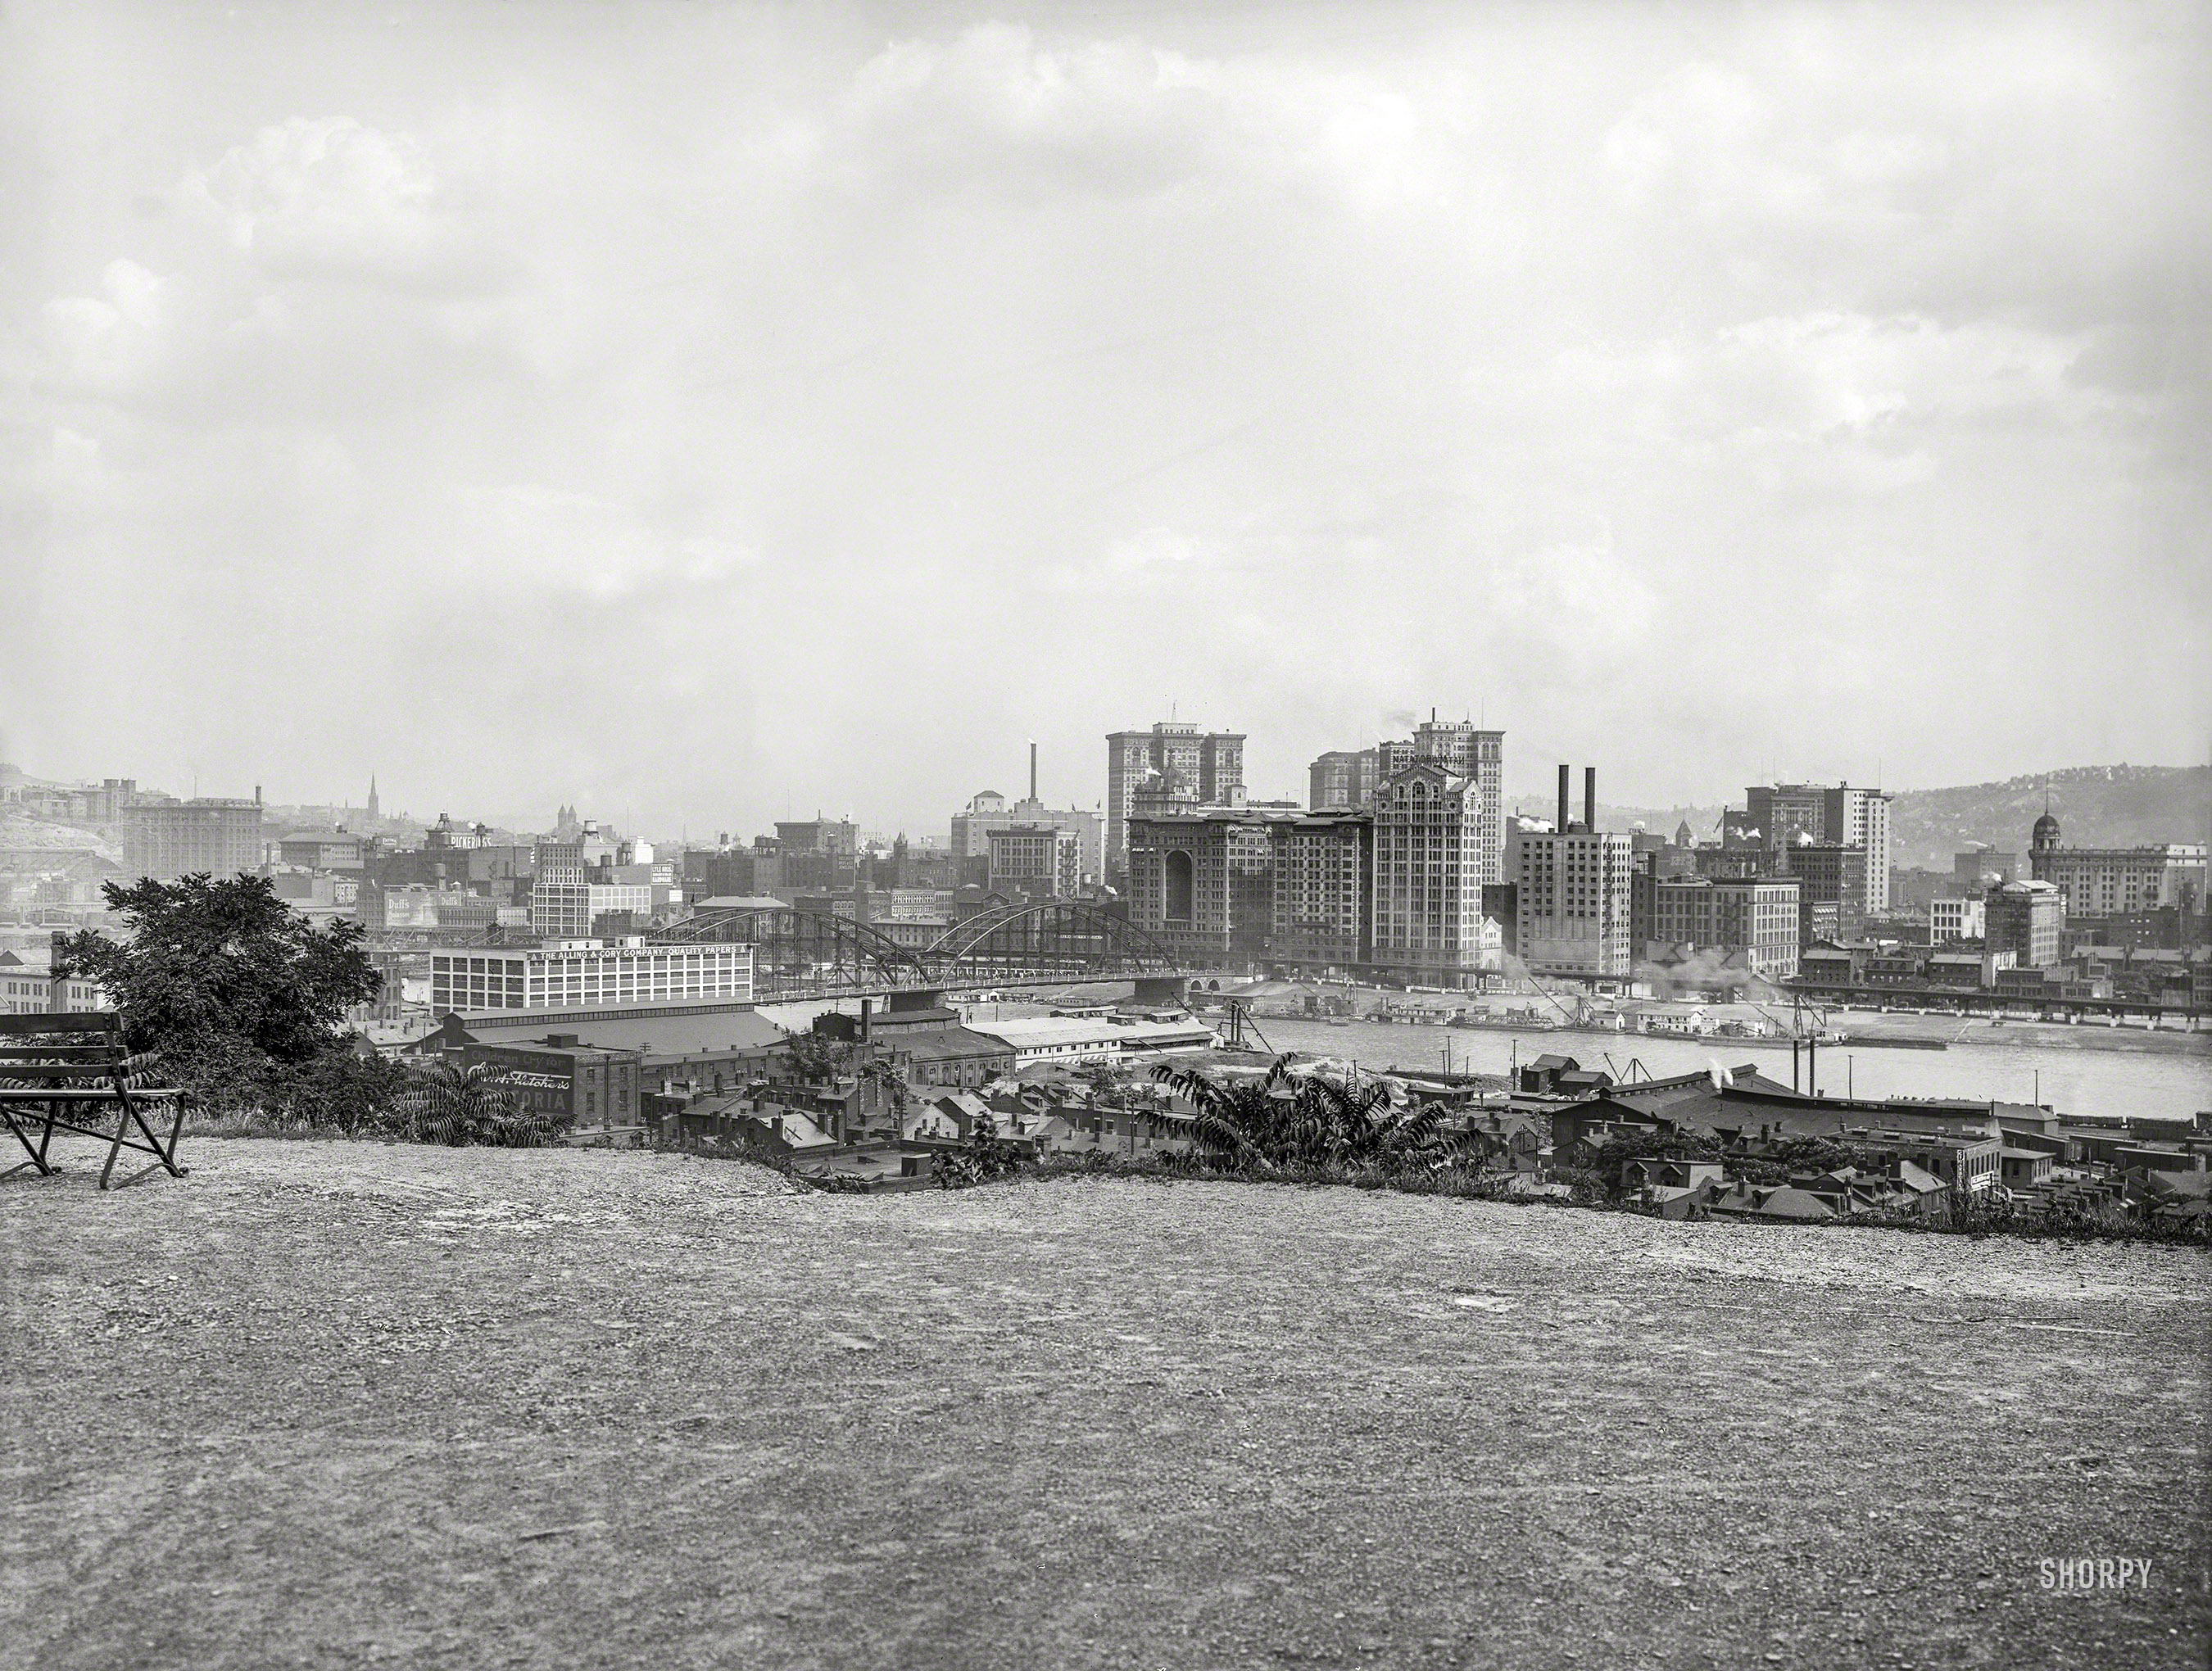 Pittsburgh circa 1910. "Sixth Street Bridge and skyscrapers across the Allegheny River." 8x10 inch glass negative, Detroit Publishing Company. View full size.